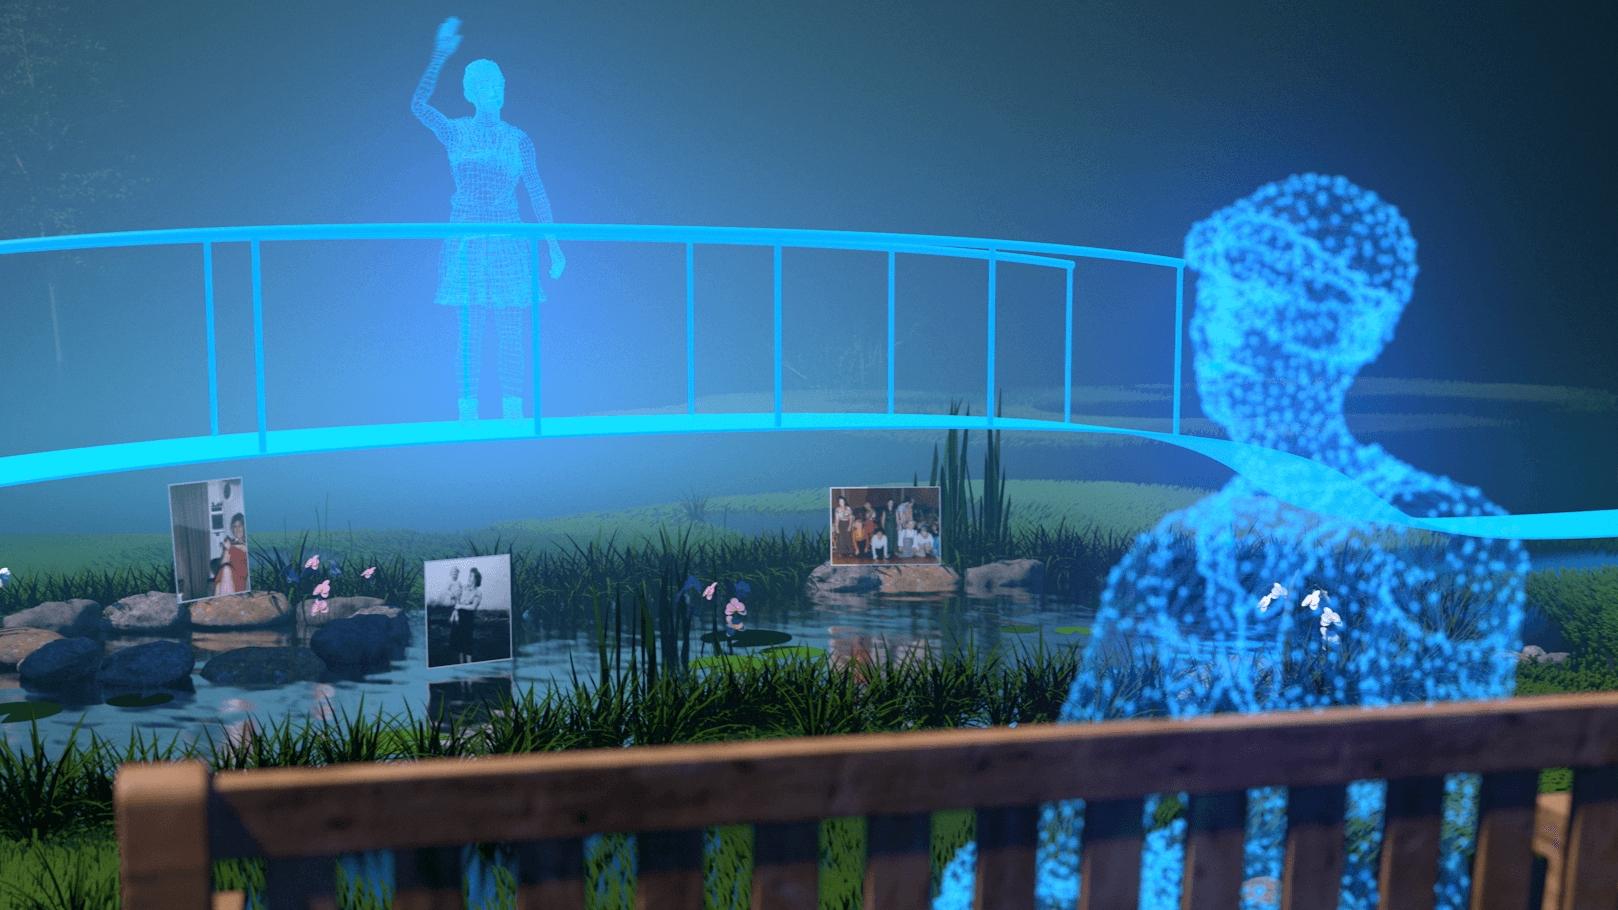 Image from VR film depicting figure on a bridge waving to man on bench